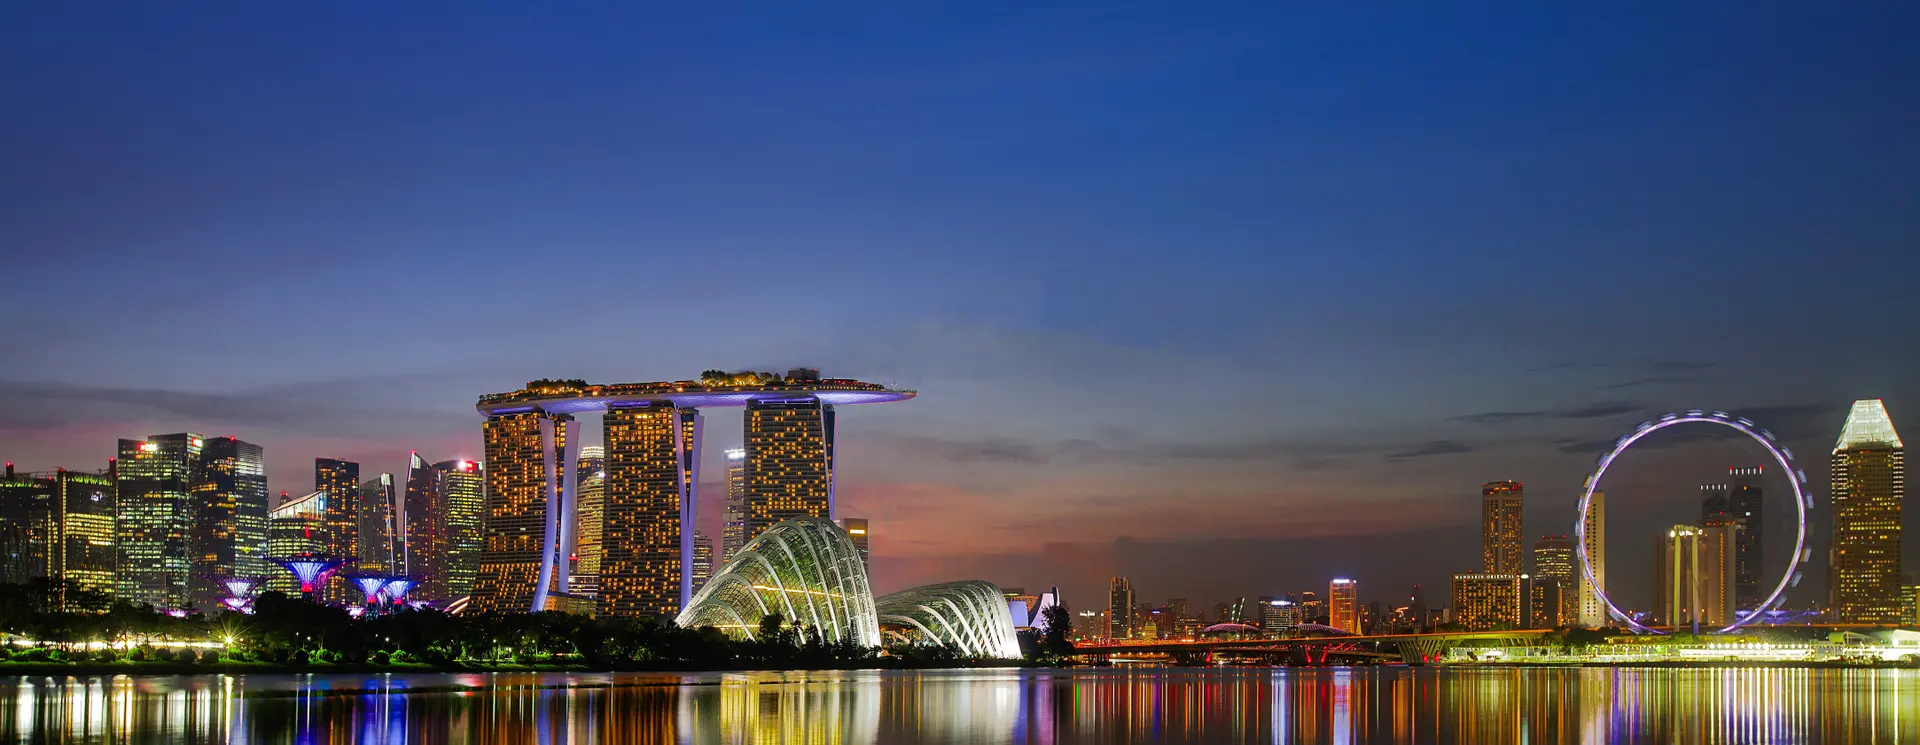 Hotel review Location' - Marina Bay Sands - 0